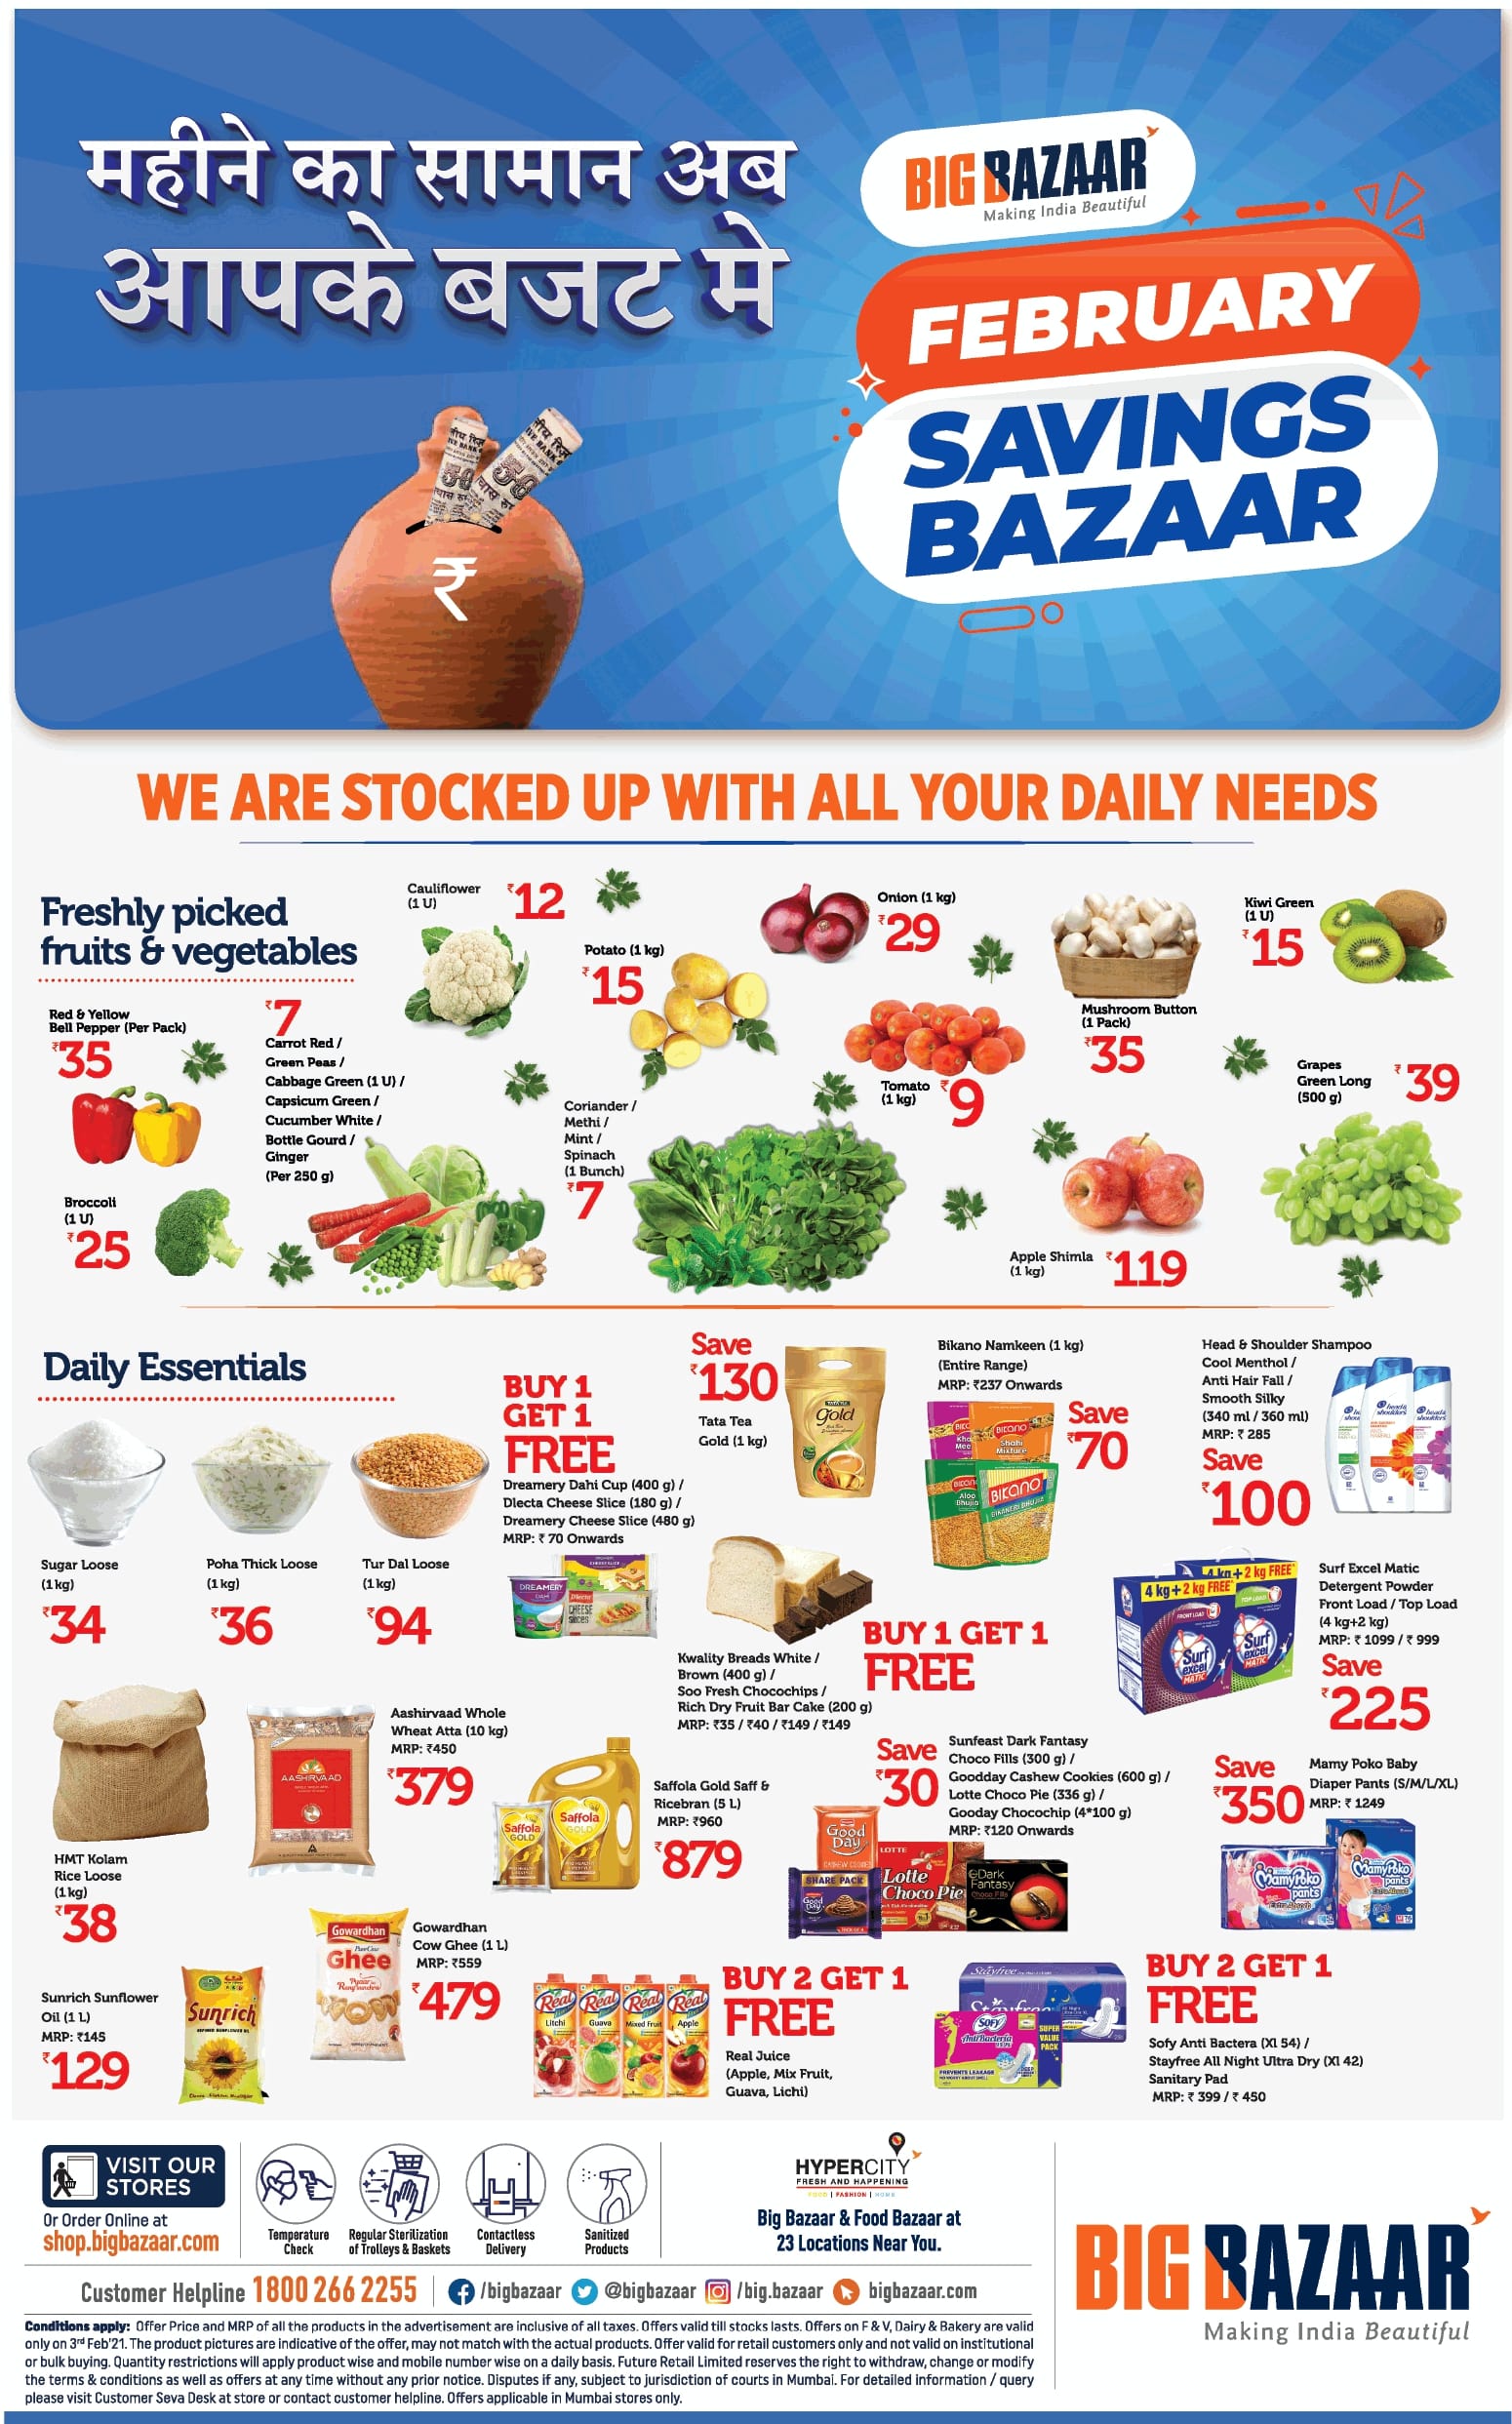 big-bazaar-february-saving-bazaar-for-all-your-daily-needs-ad-bombay-times-03-02-2021